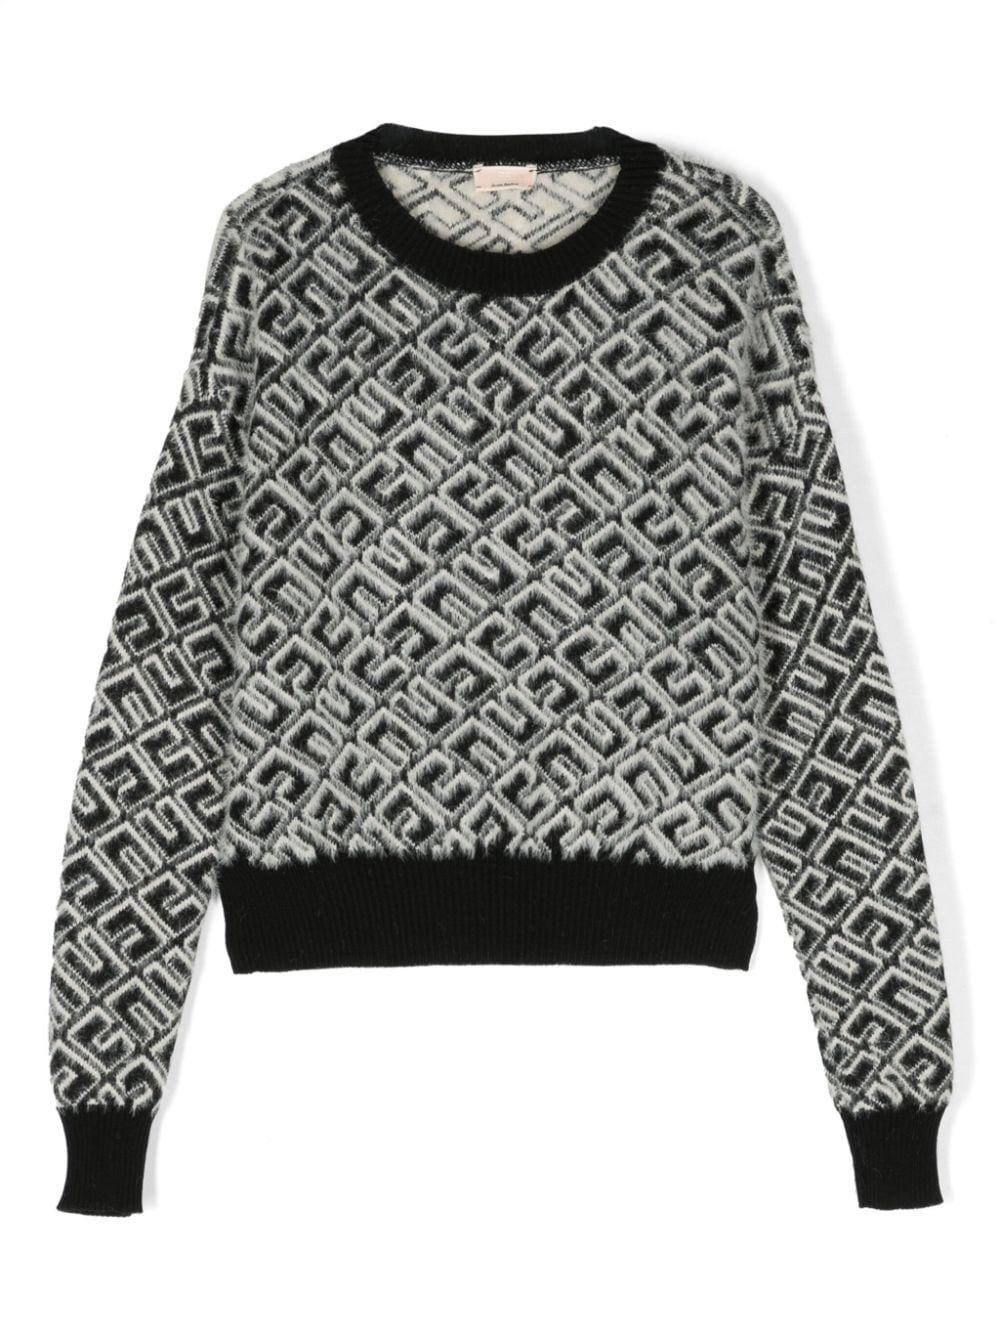 Black and white sweater for girls